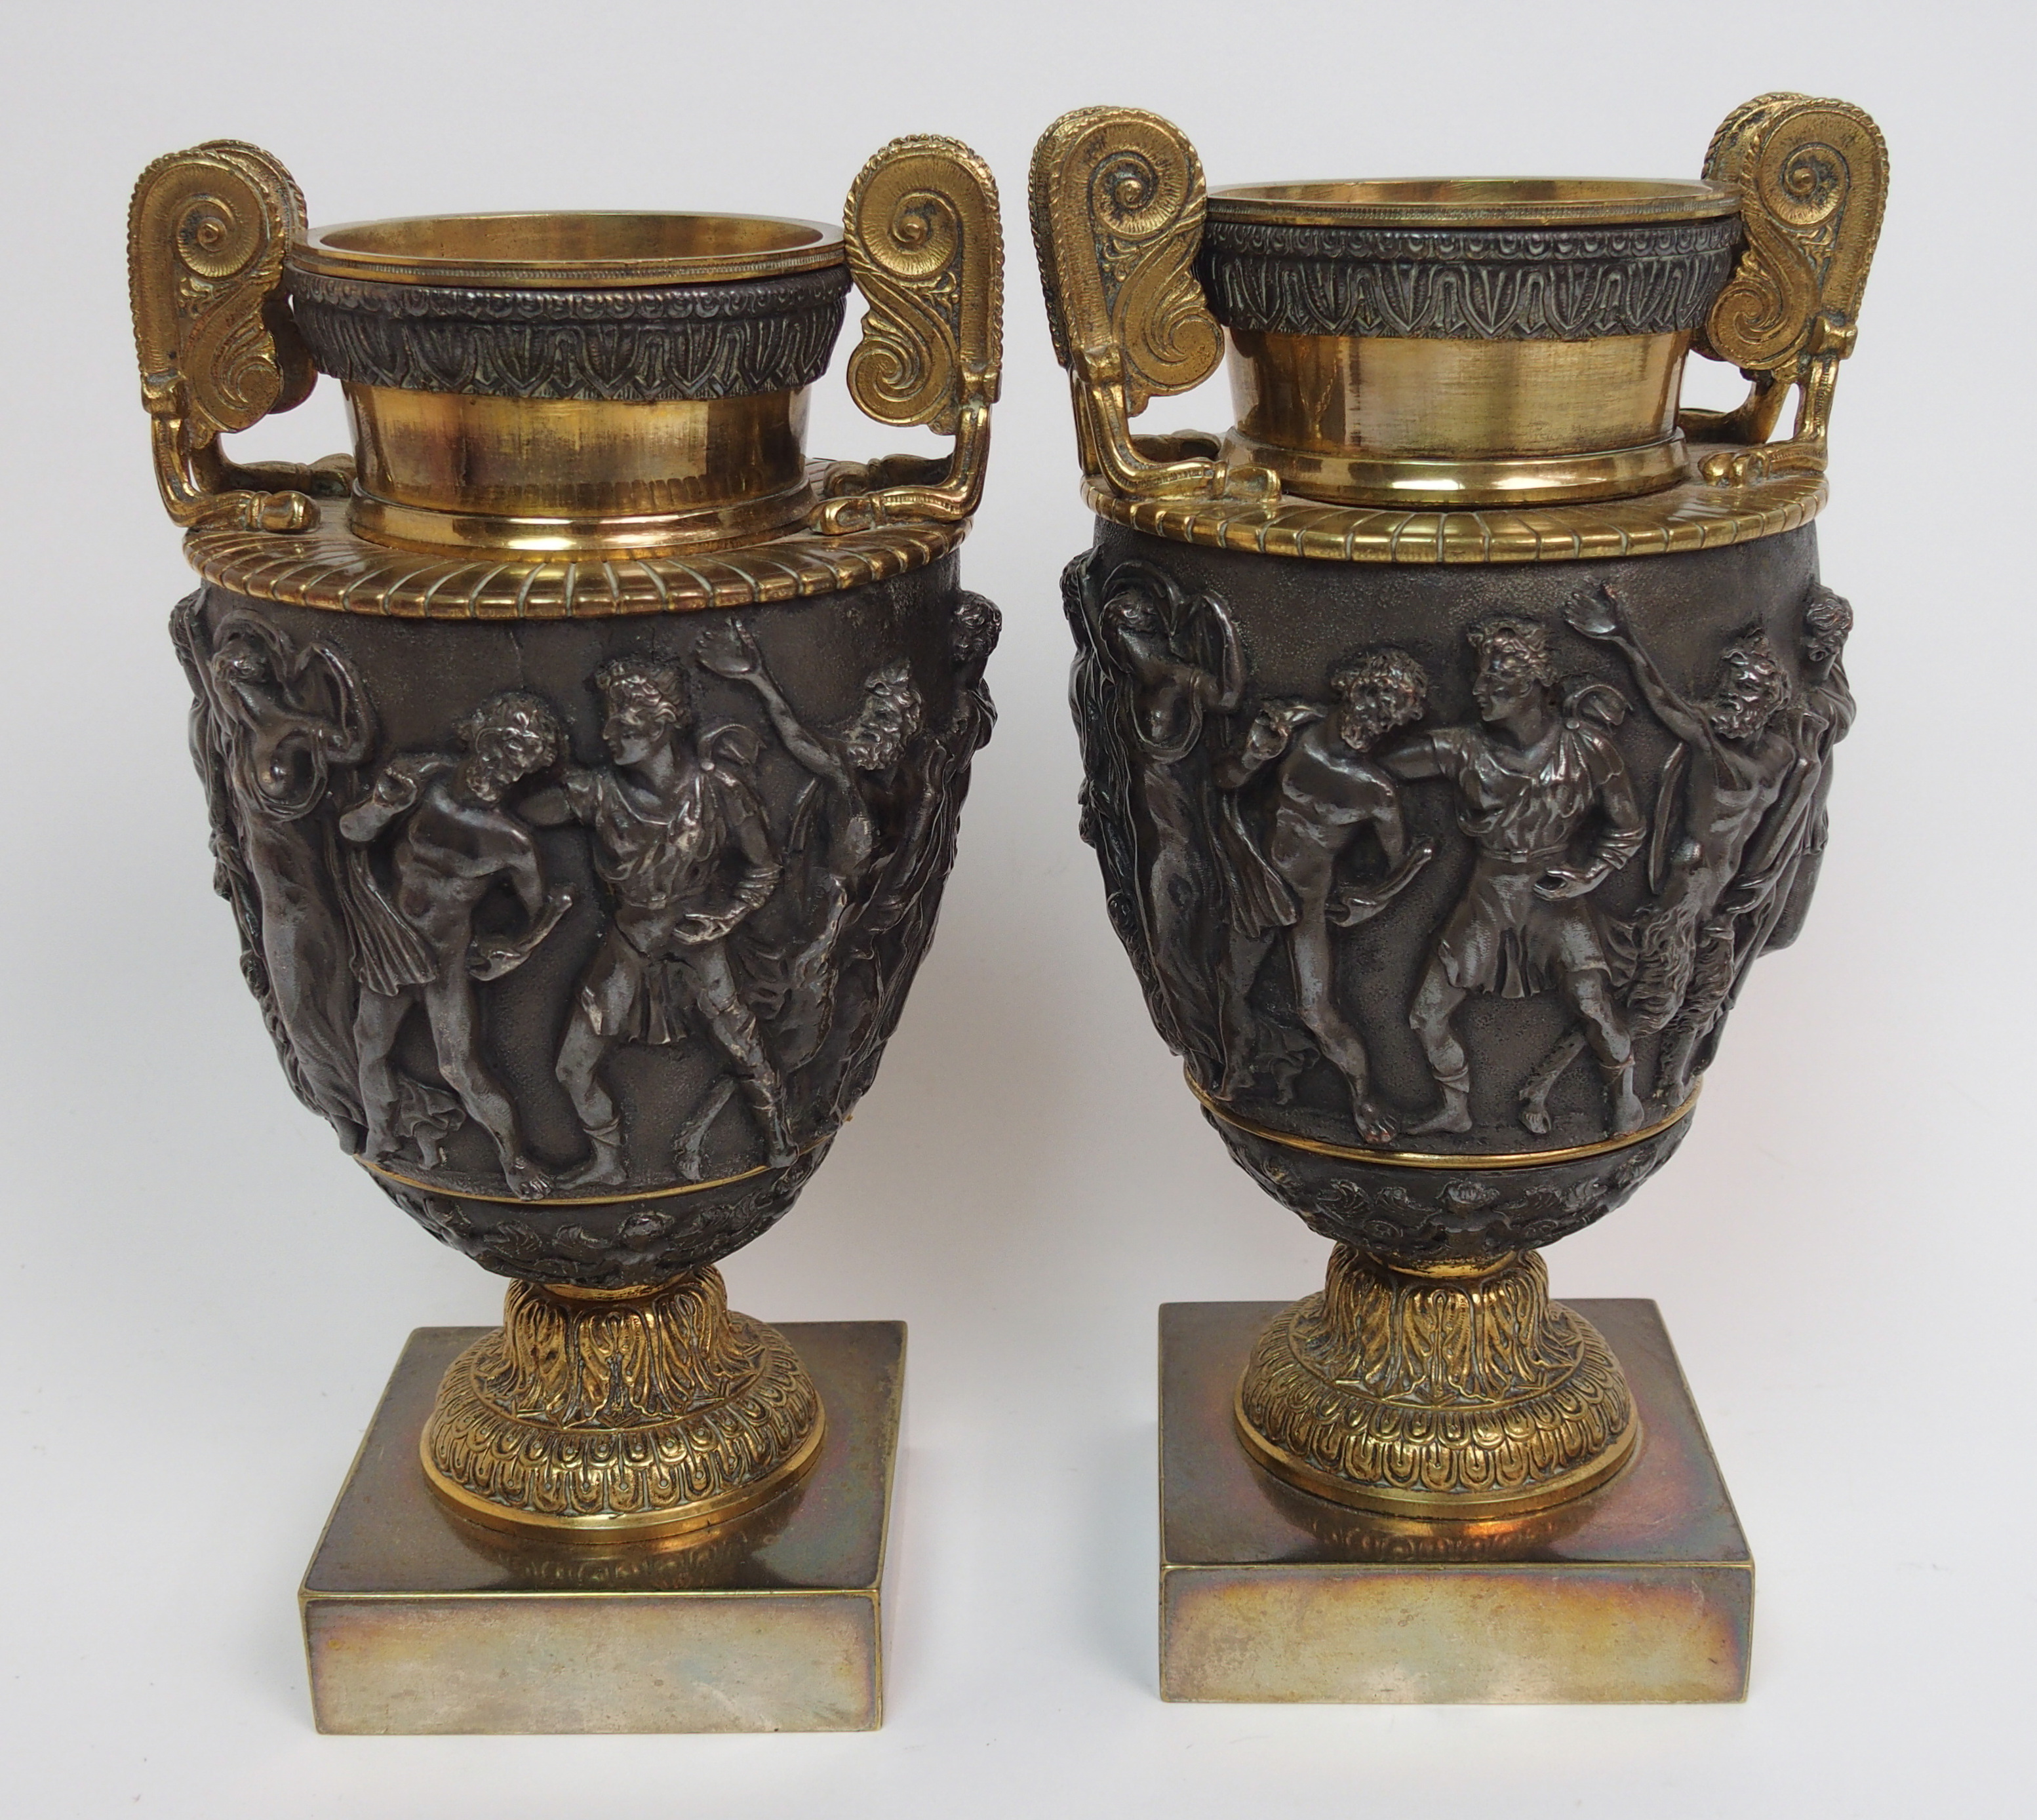 A pair of late 19th century bronzed and gilded metal copies of the Townley Vase originally from